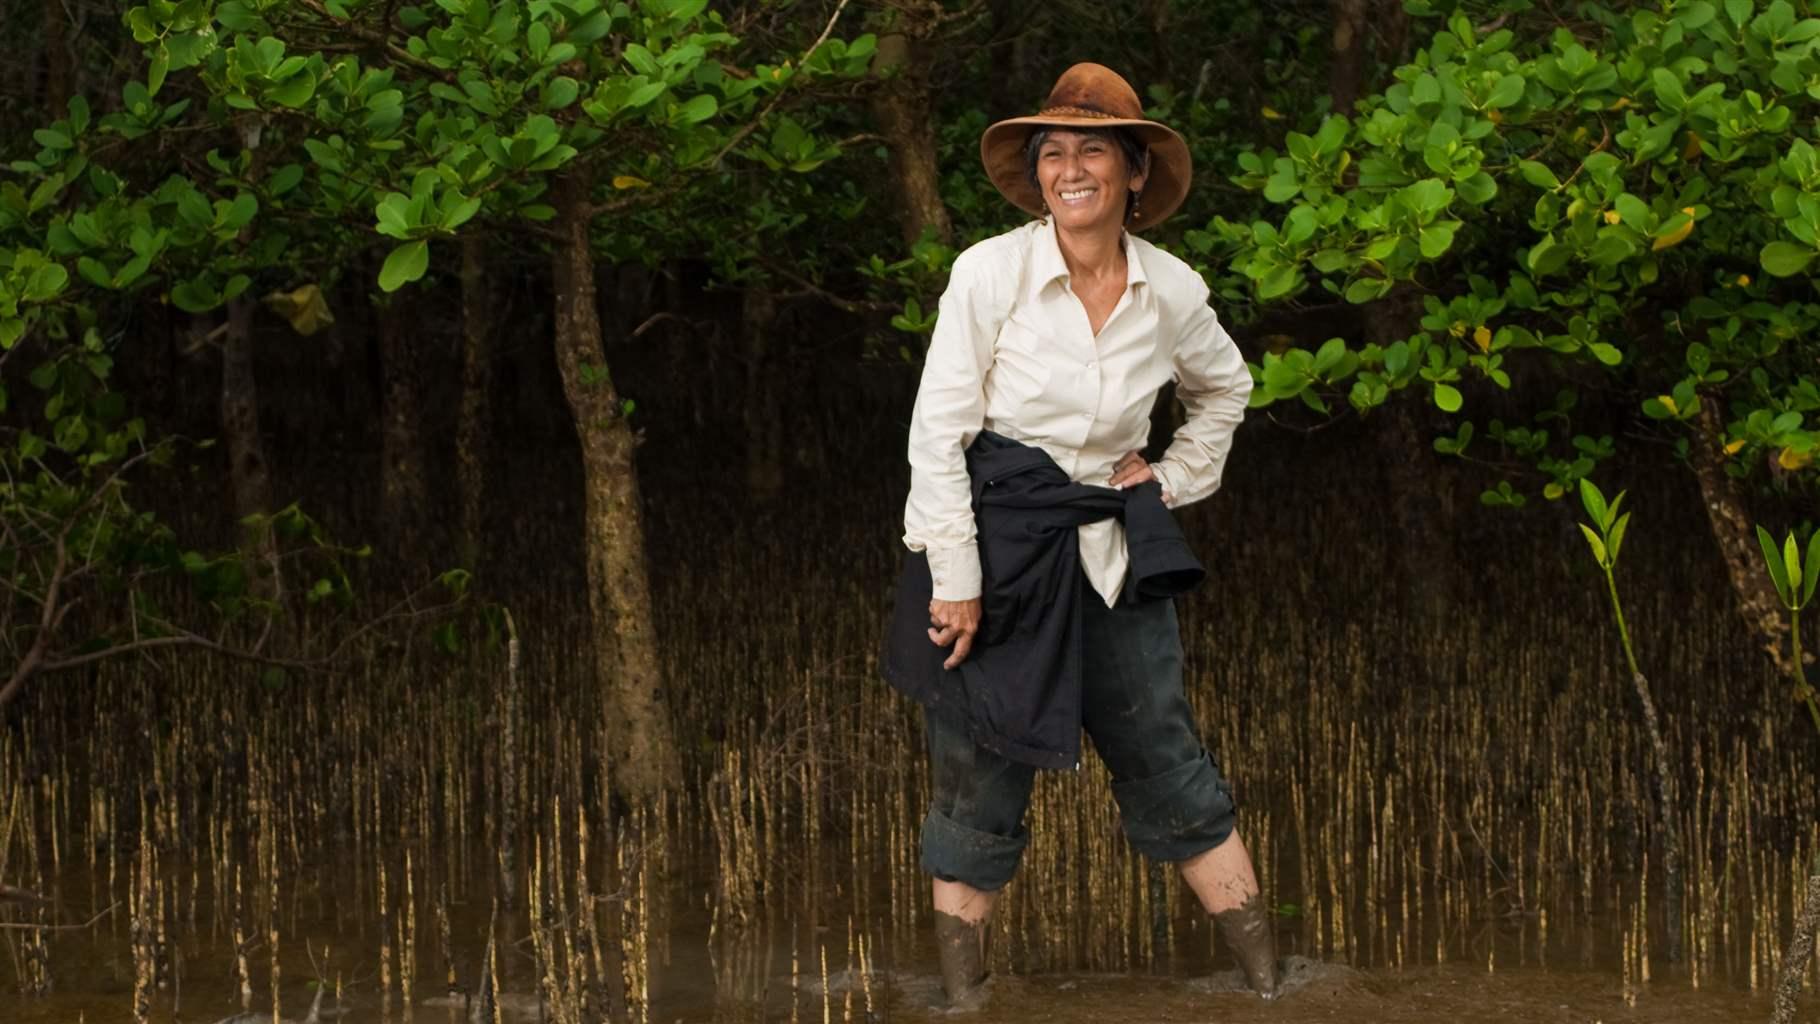 Pew marine fellow Jurgenne Primavera in nearly knee-deep mud at a mangrove site in her native Philippines in 2009—a place she loves and works to protect.  